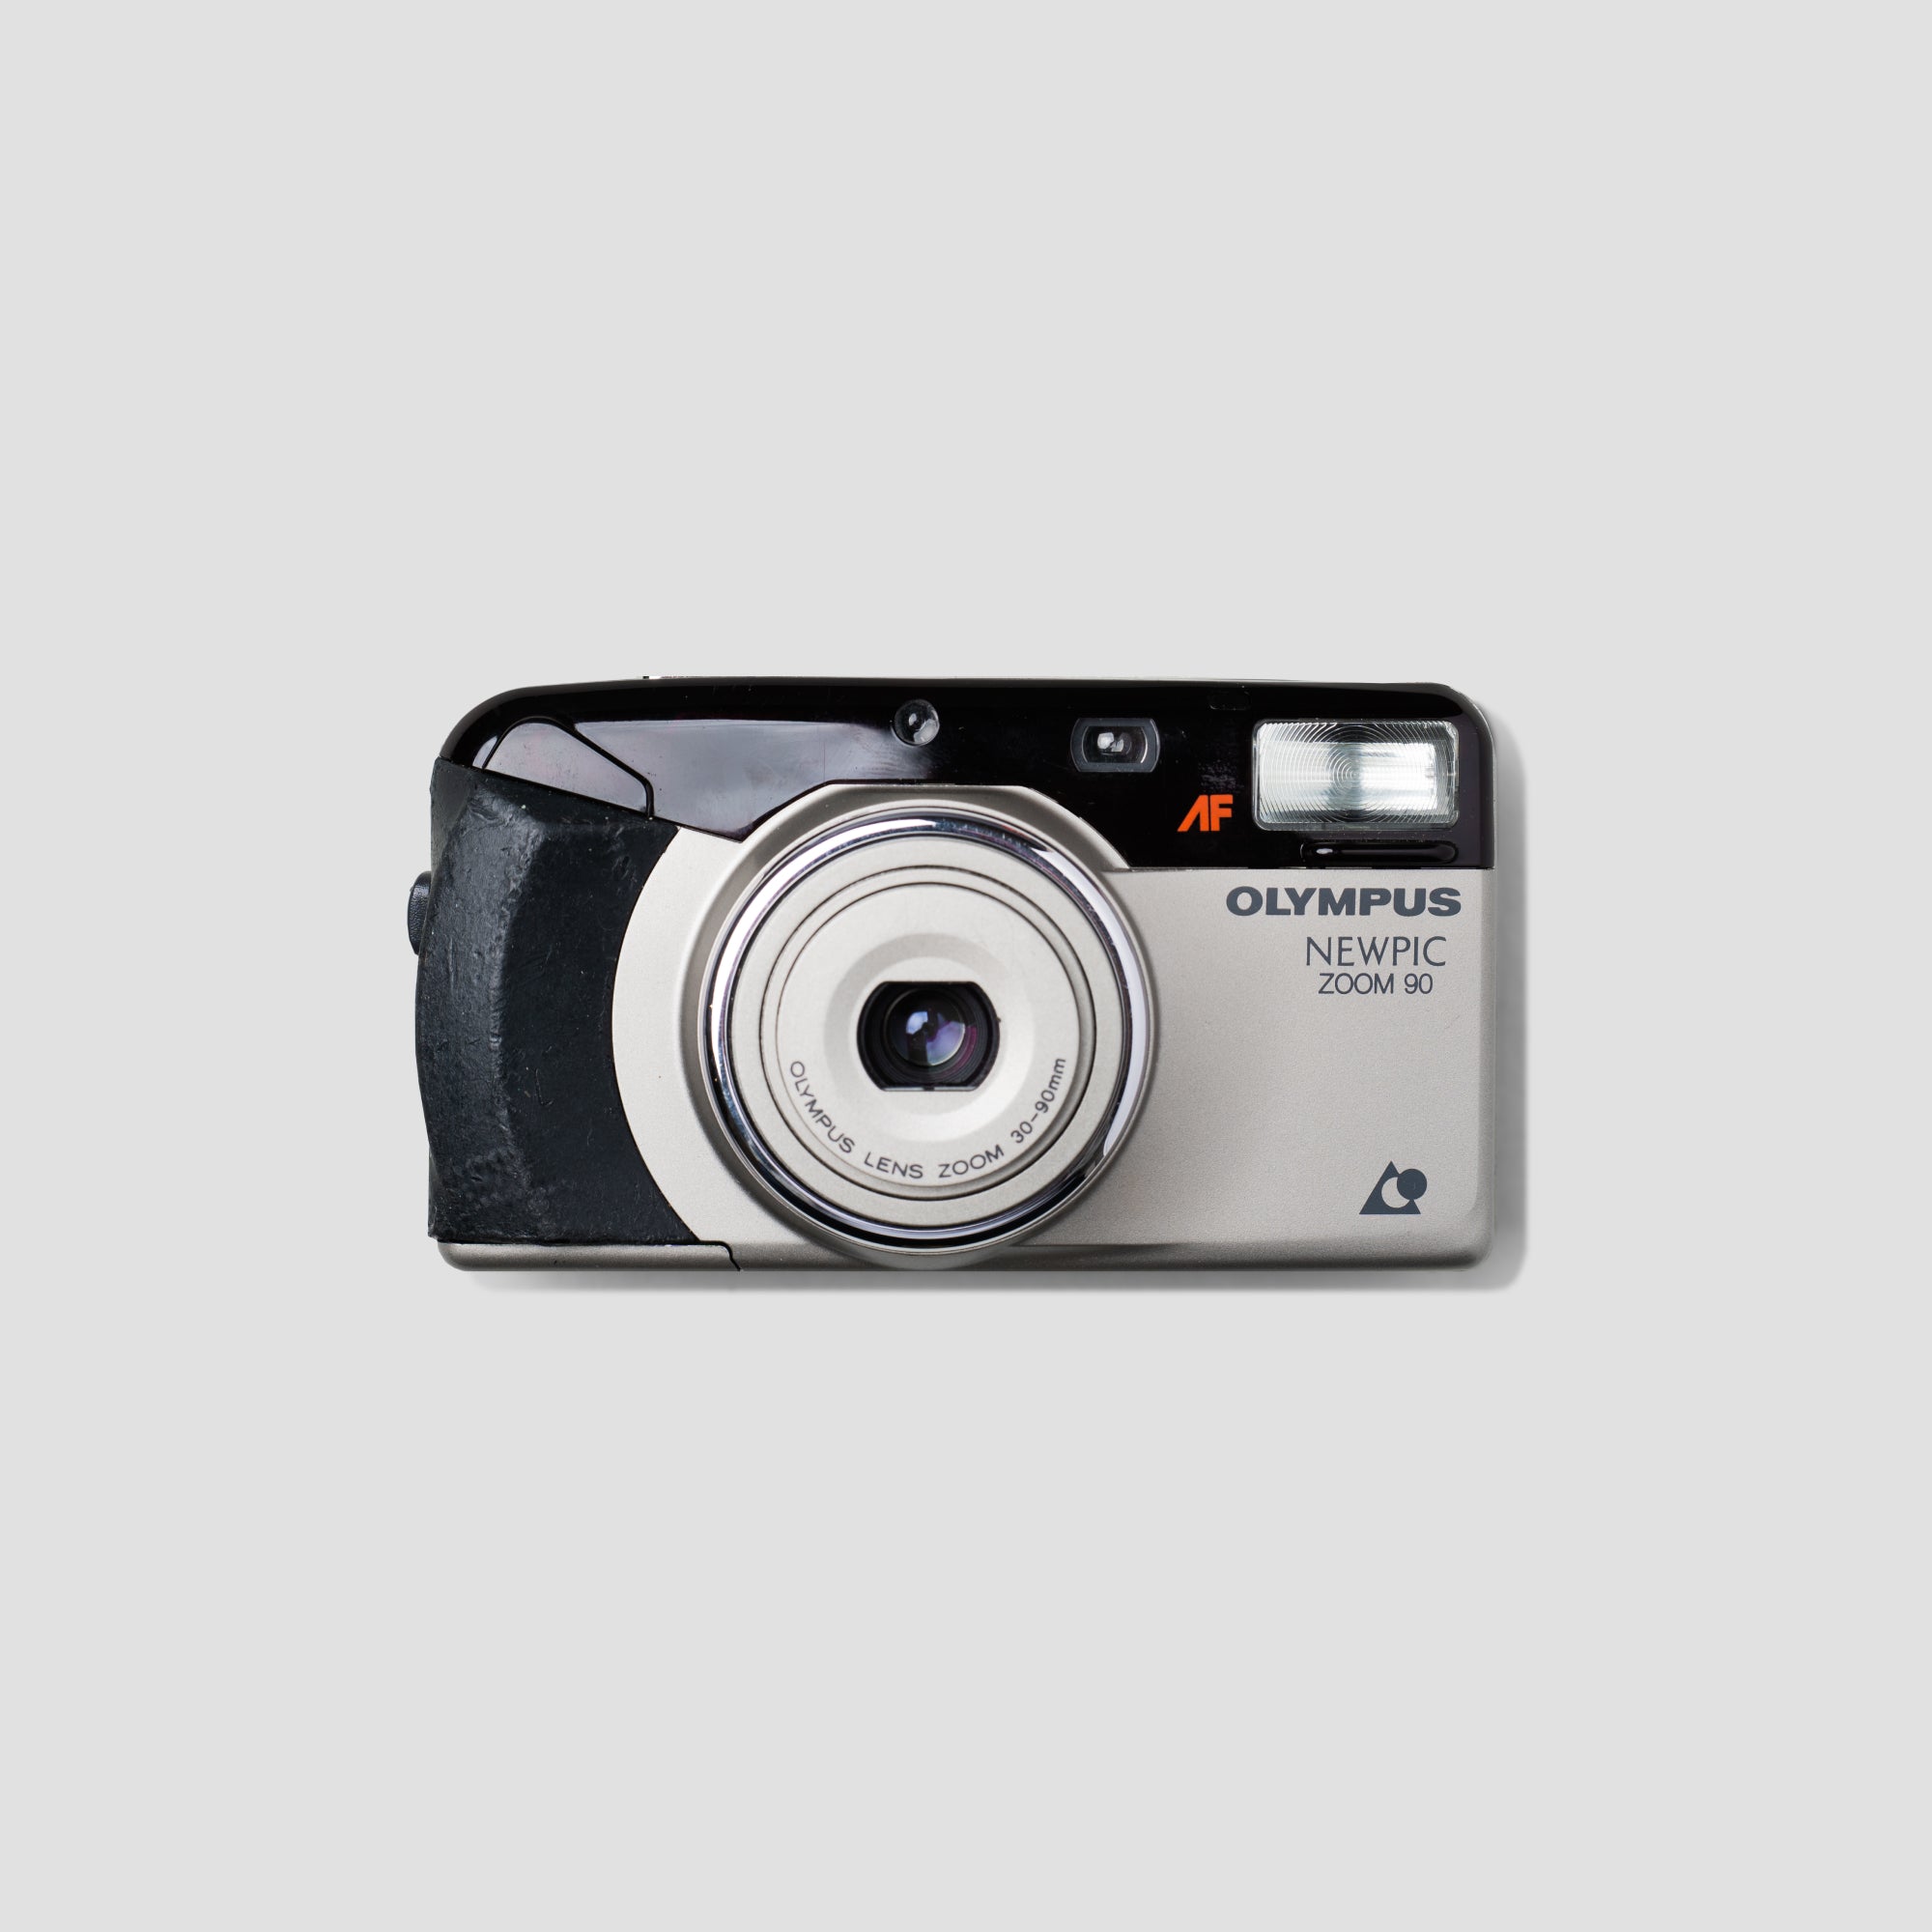 Buy Olympus Newpic Zoom 90 now at Analogue Amsterdam